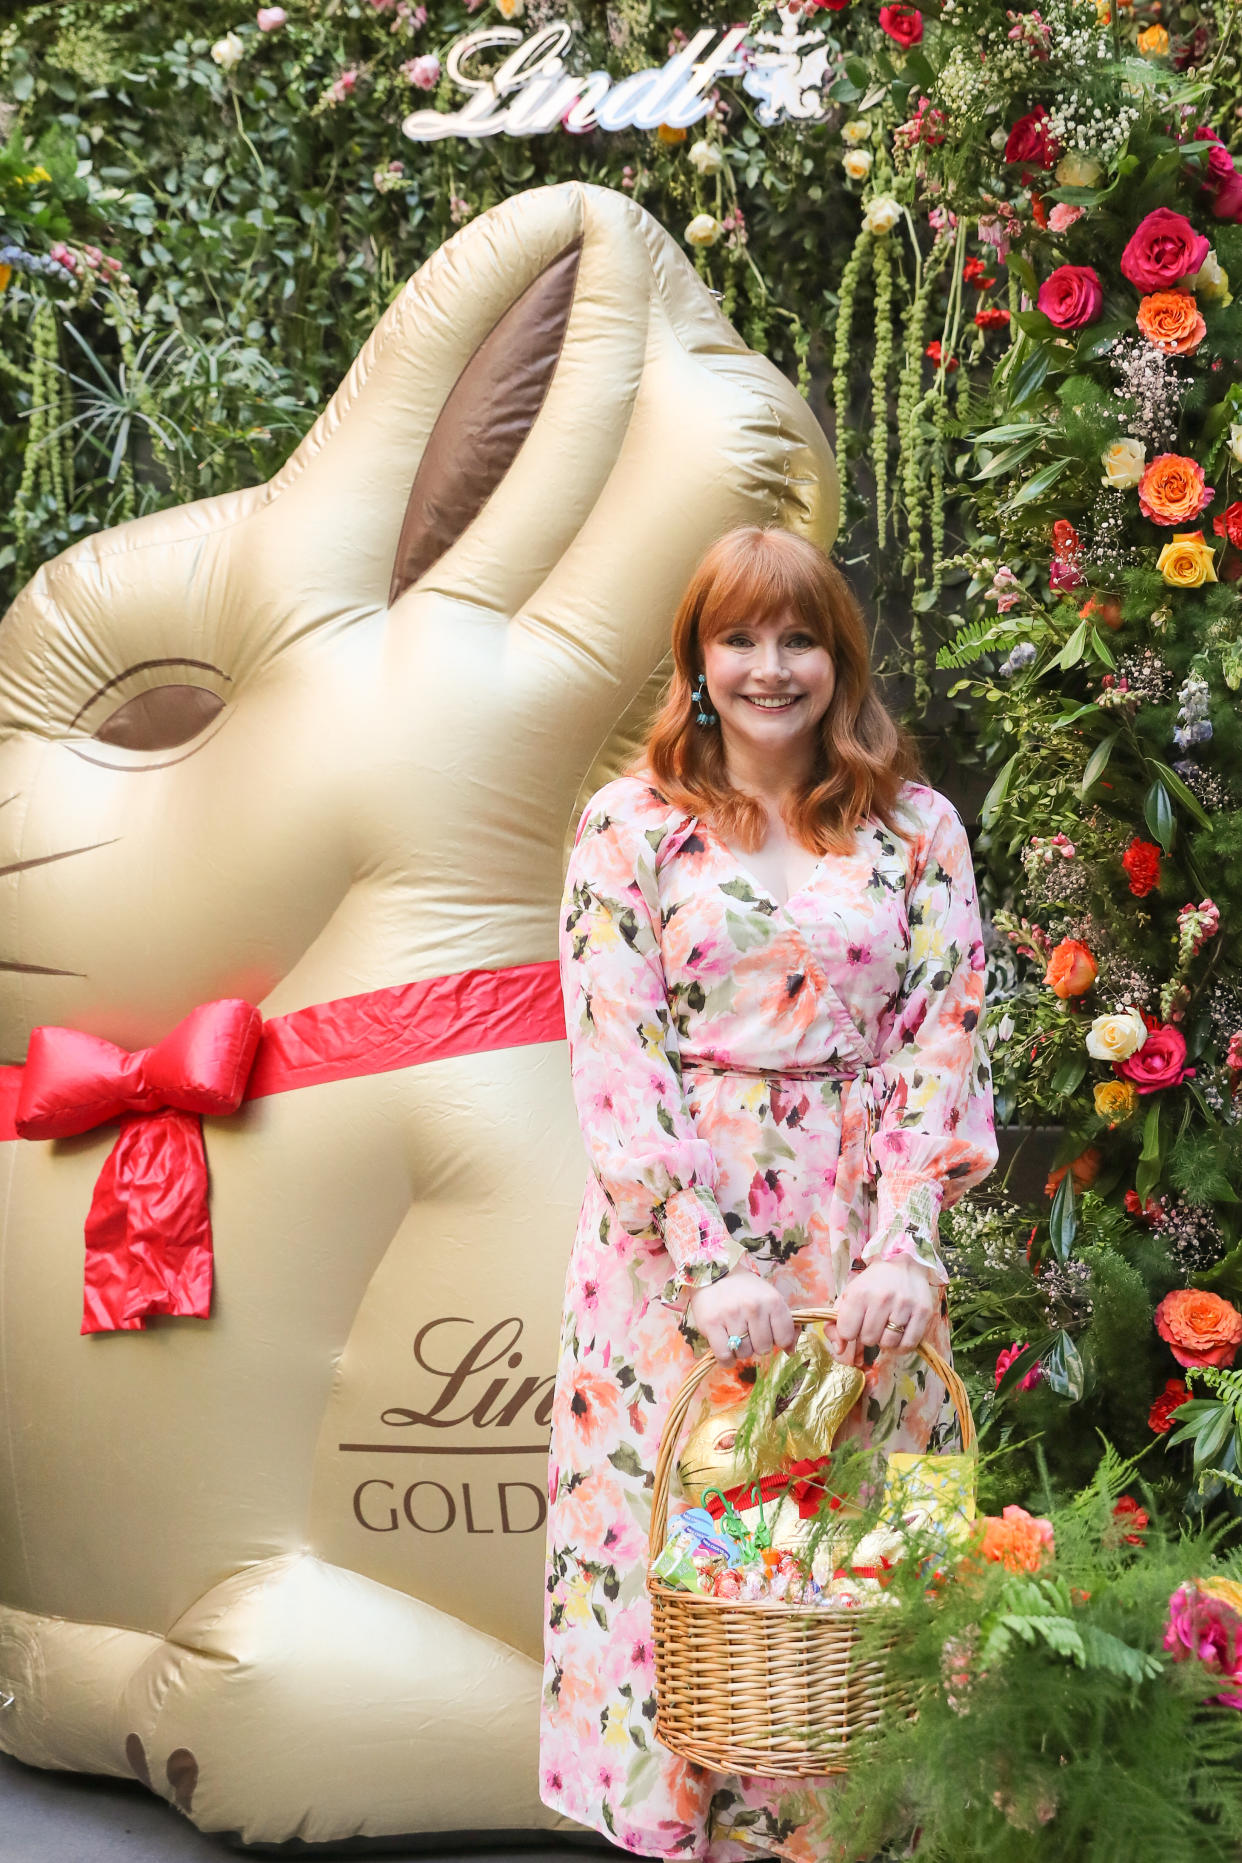 Howard spoke with Yahoo Life during an event promoting Lindt Chocolatier and its iconic gold bunny. (Photo: misshattan)